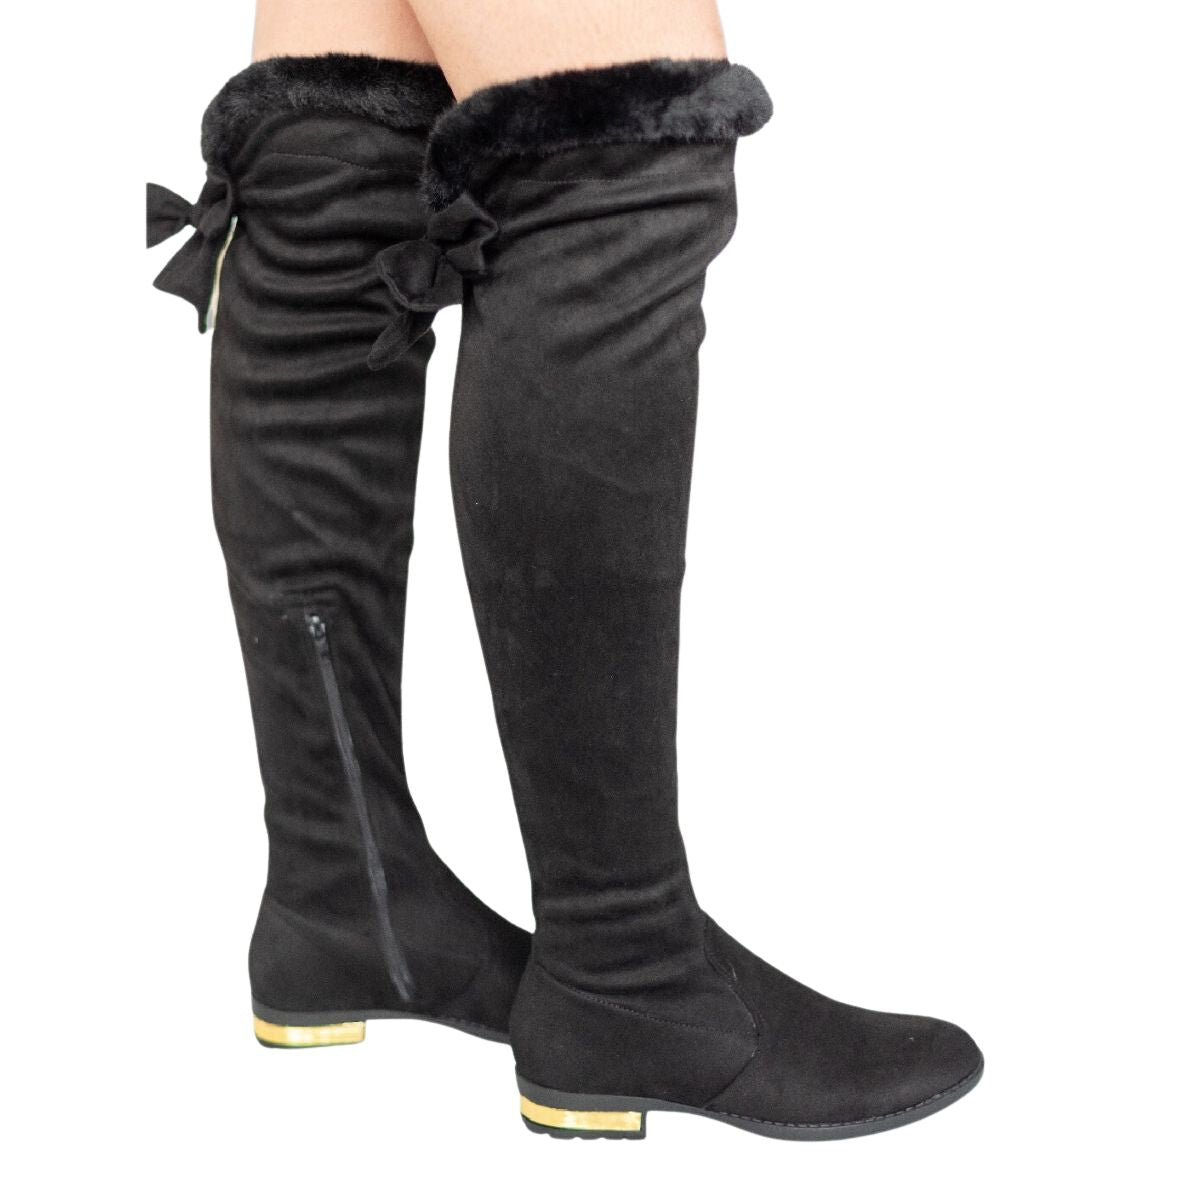 IVY WOMEN'S BLACK SUEDE OVER THE KNEE FUR BOOTS